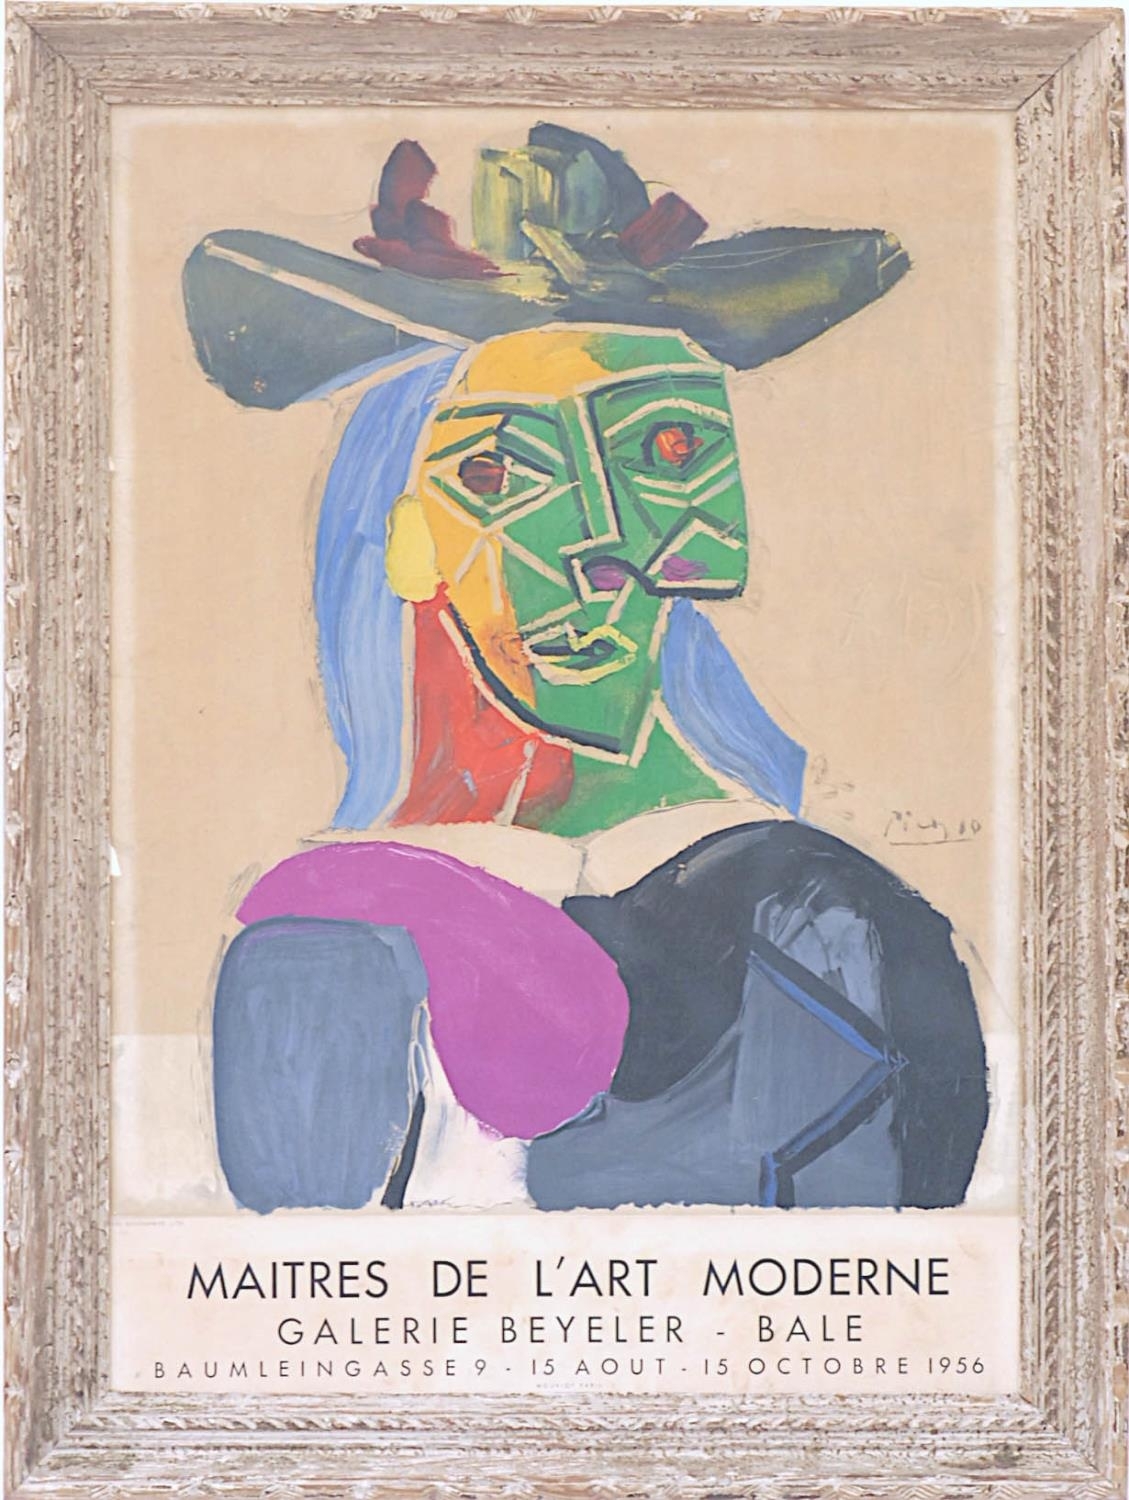 Artwork by Pablo Picasso, 'Maitres De L'Art Moderne', Made of lithographic poster